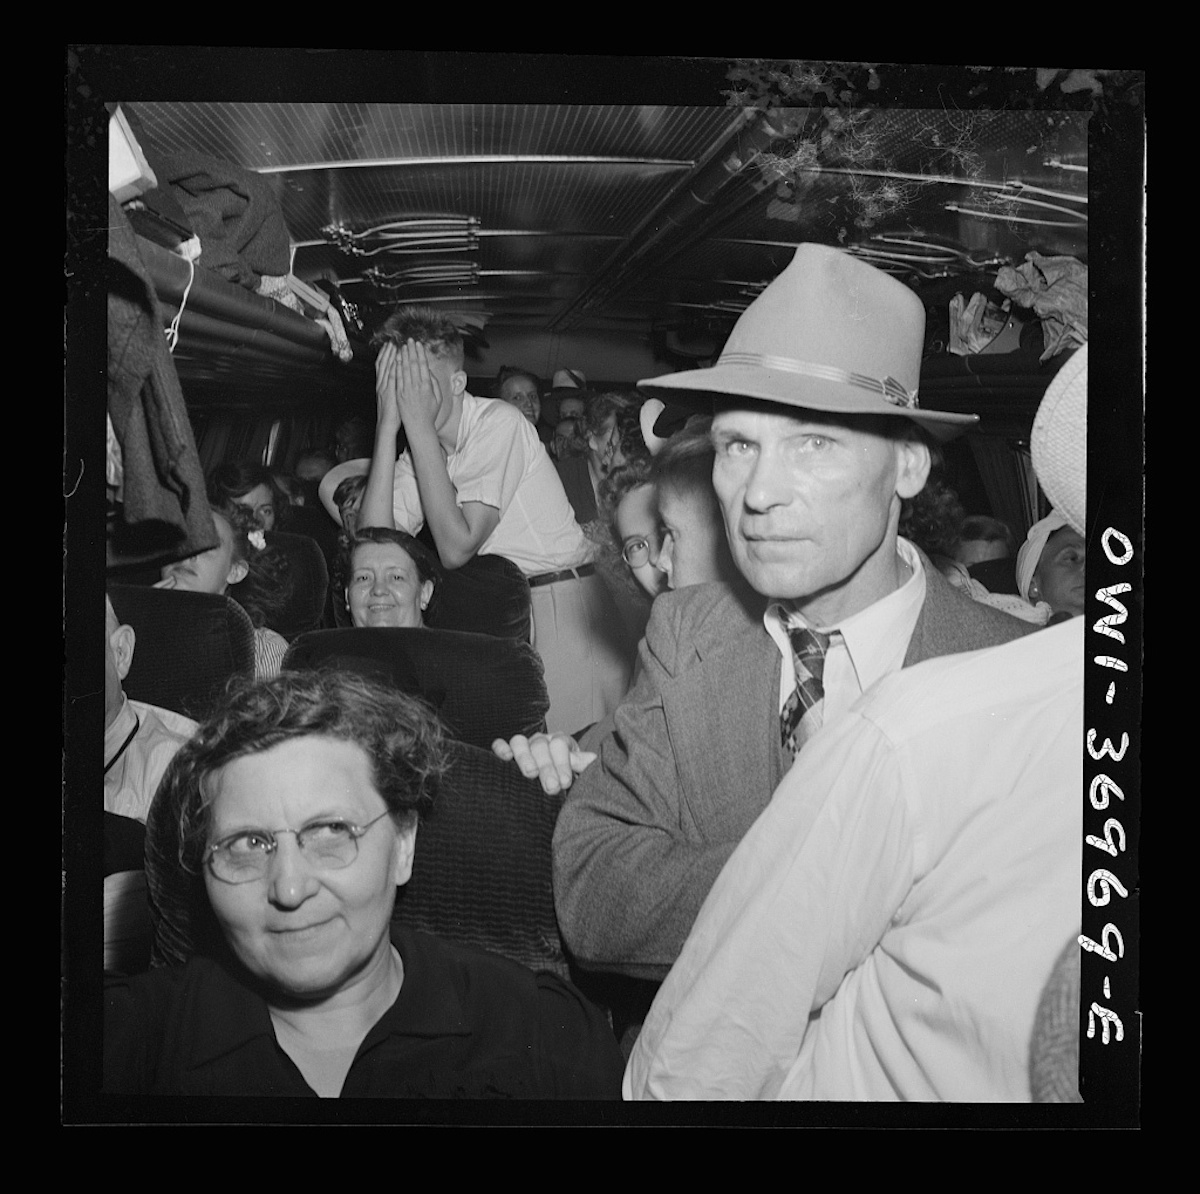 Passengers on a Greyhound bus going from Washington, D.C. to Pittsburgh, Pennsylvania